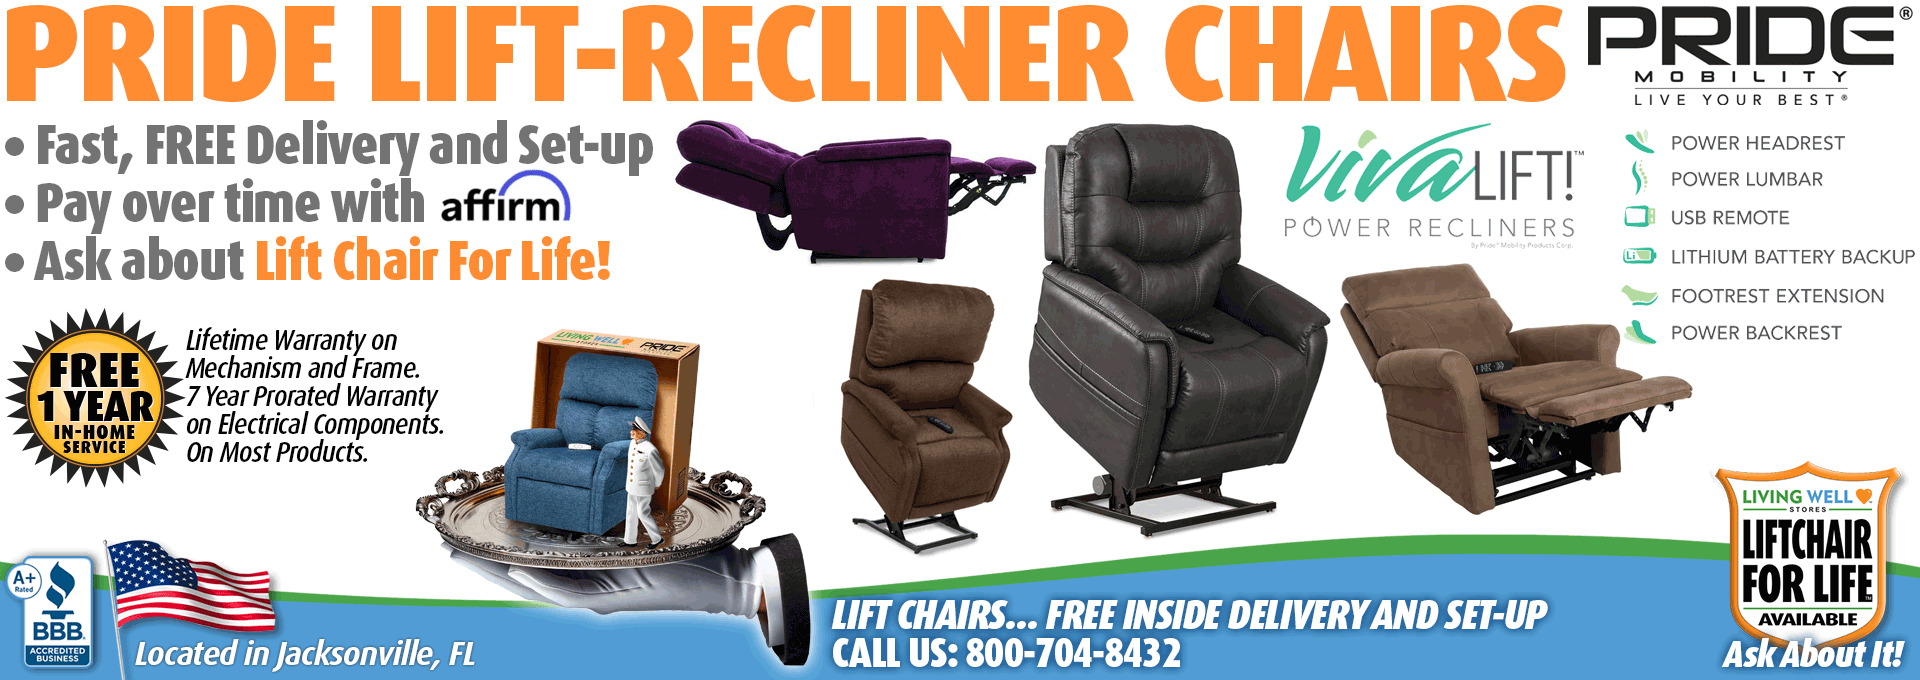 Living Well Stores: Vivalift! Collection of Power Lift Recliner Clairs from Pride Mobility